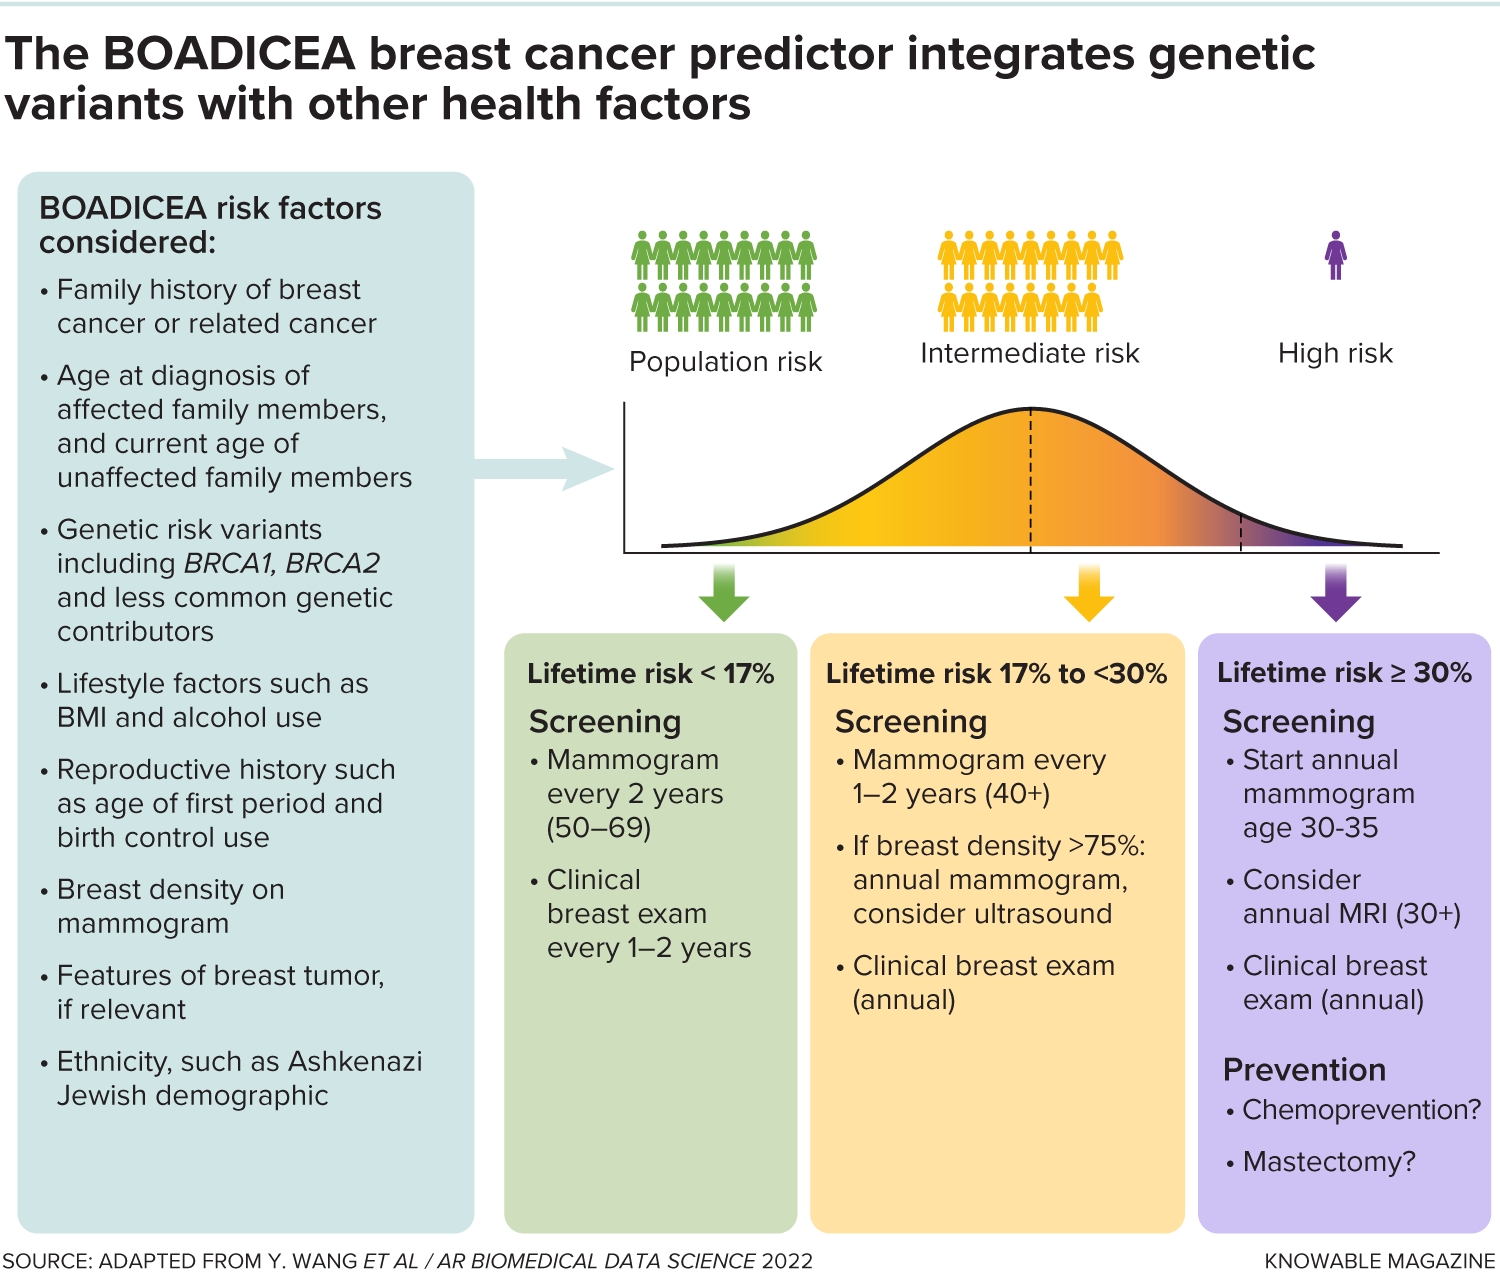 Lists factors in the BOADICEA breast cancer predictor: family history, age, genetic variants, lifestyle, reproductive history, breast density, tumor features and demographic group. Preventive measures are listed for lifetime risk of under 17%, 17% to 30% and 30% and over.